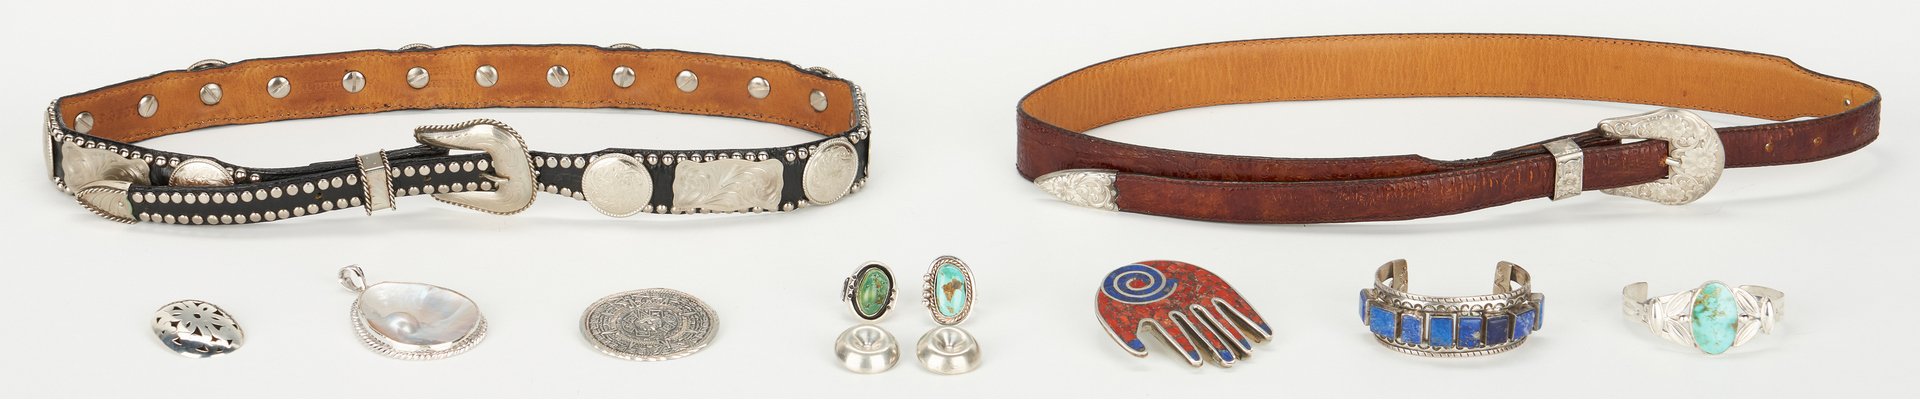 Lot 715: Mexican Sterling Jewelry & Al Beres Belts